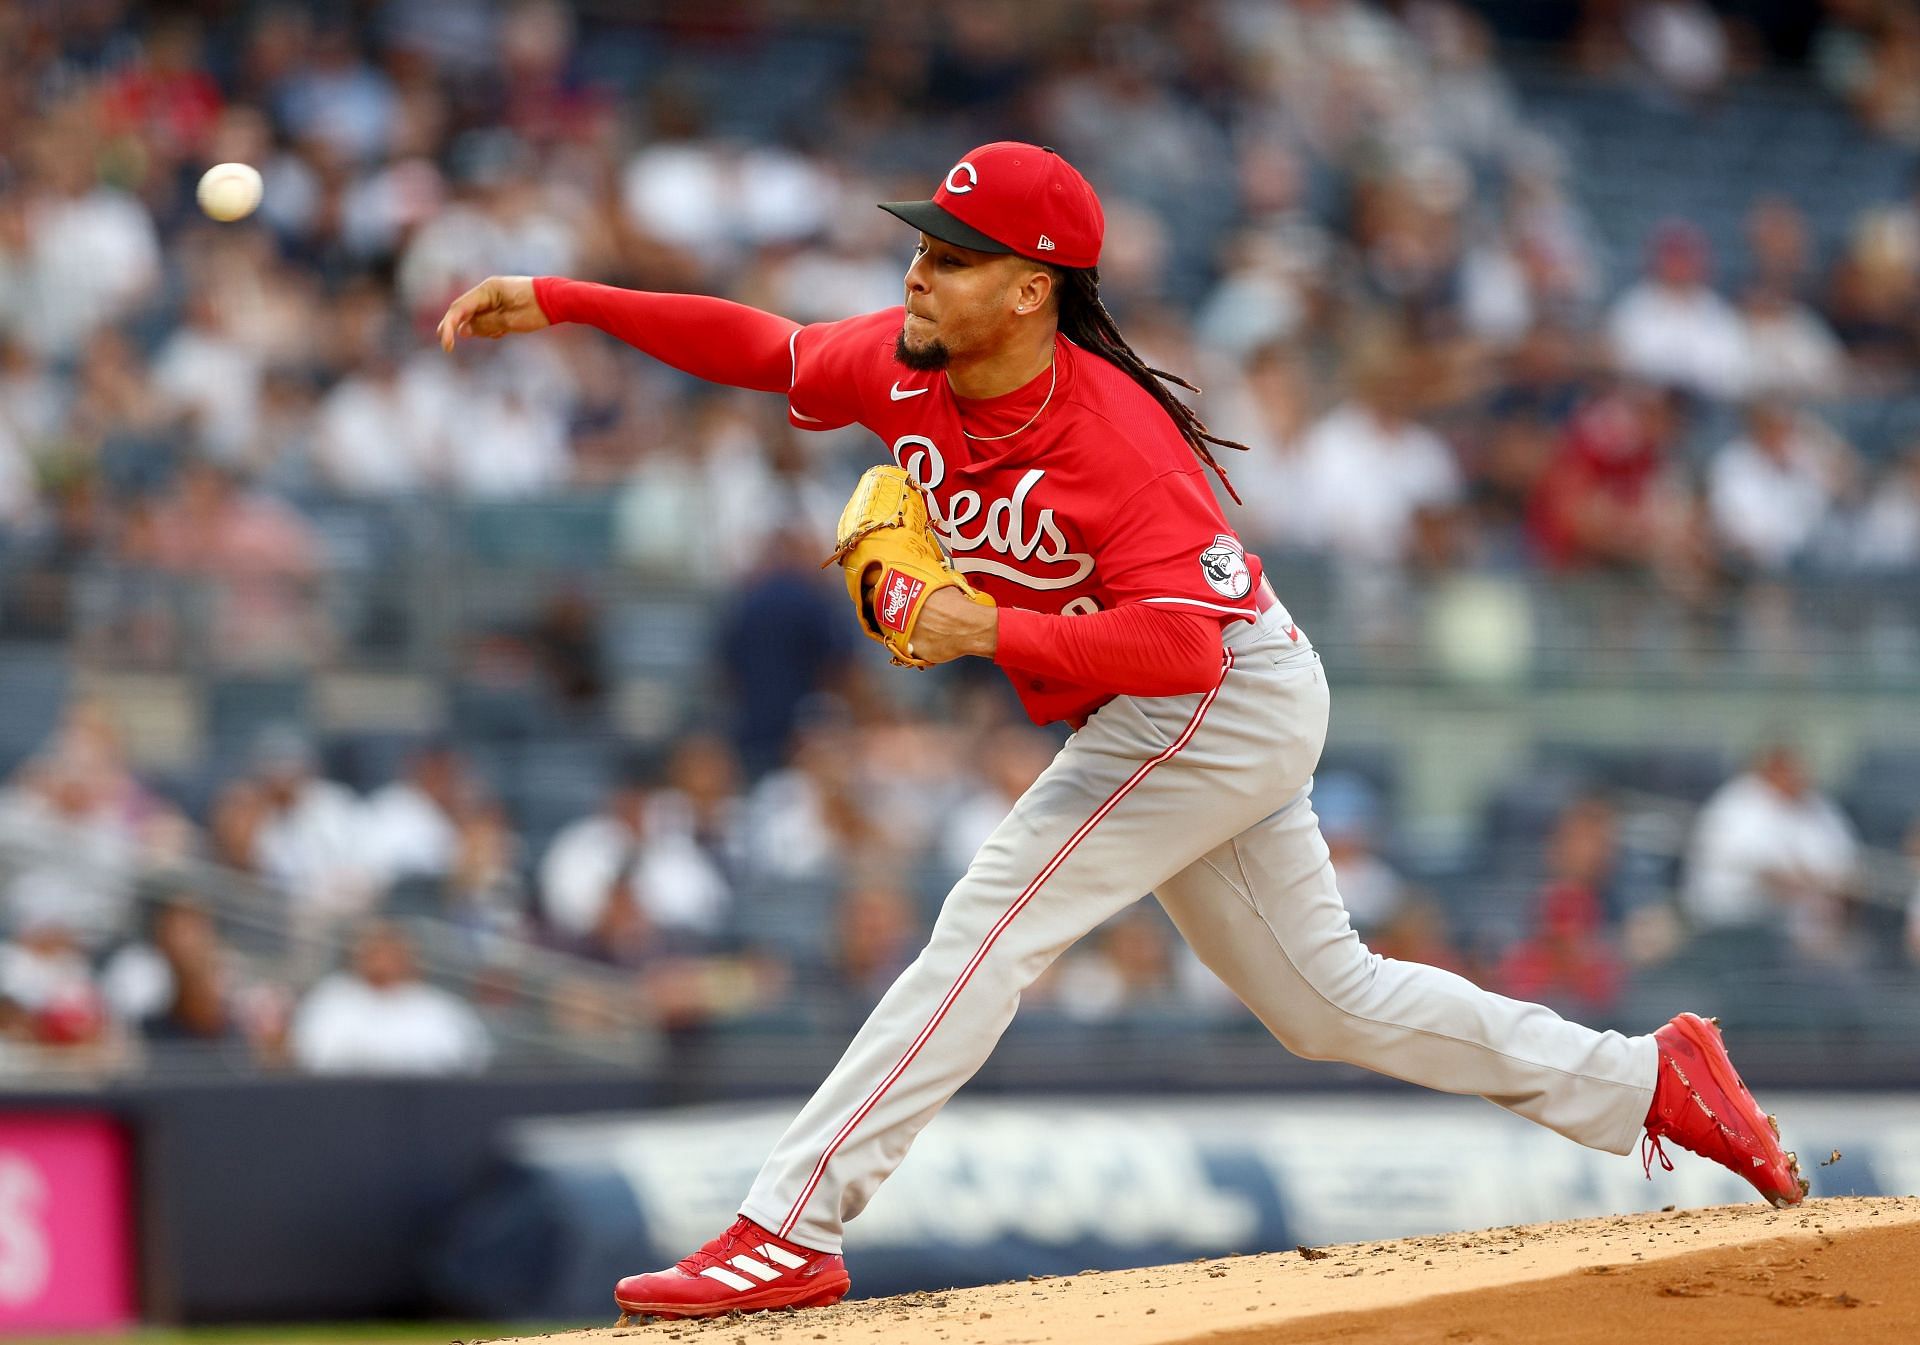 Luis Castillo pitches during a Cincinnati Reds v New York Yankees game.